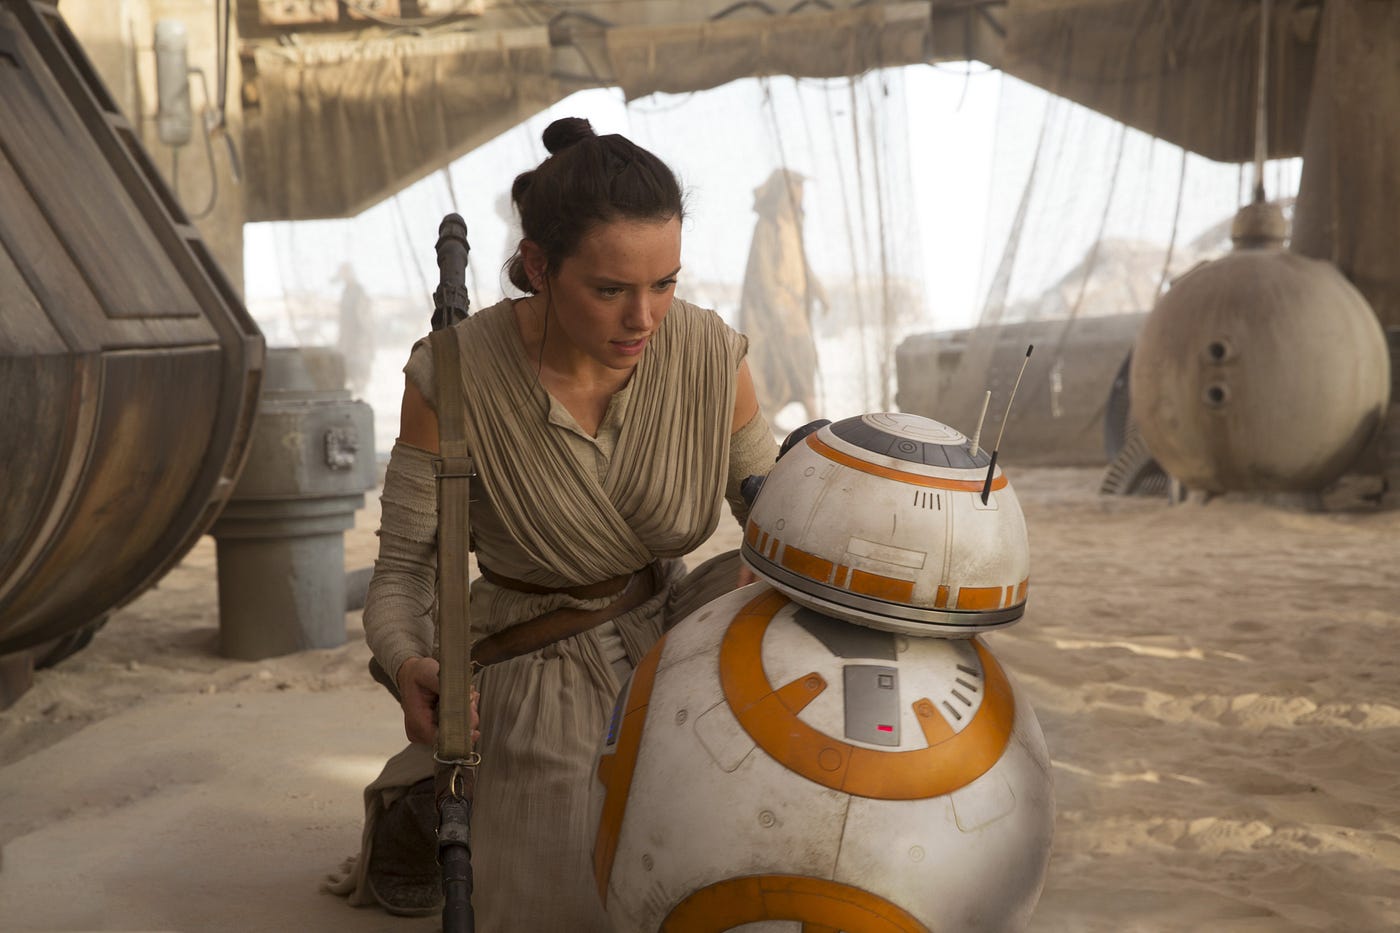 A Deep Dive into Rey Skywalker's Character Arc - The Daily News